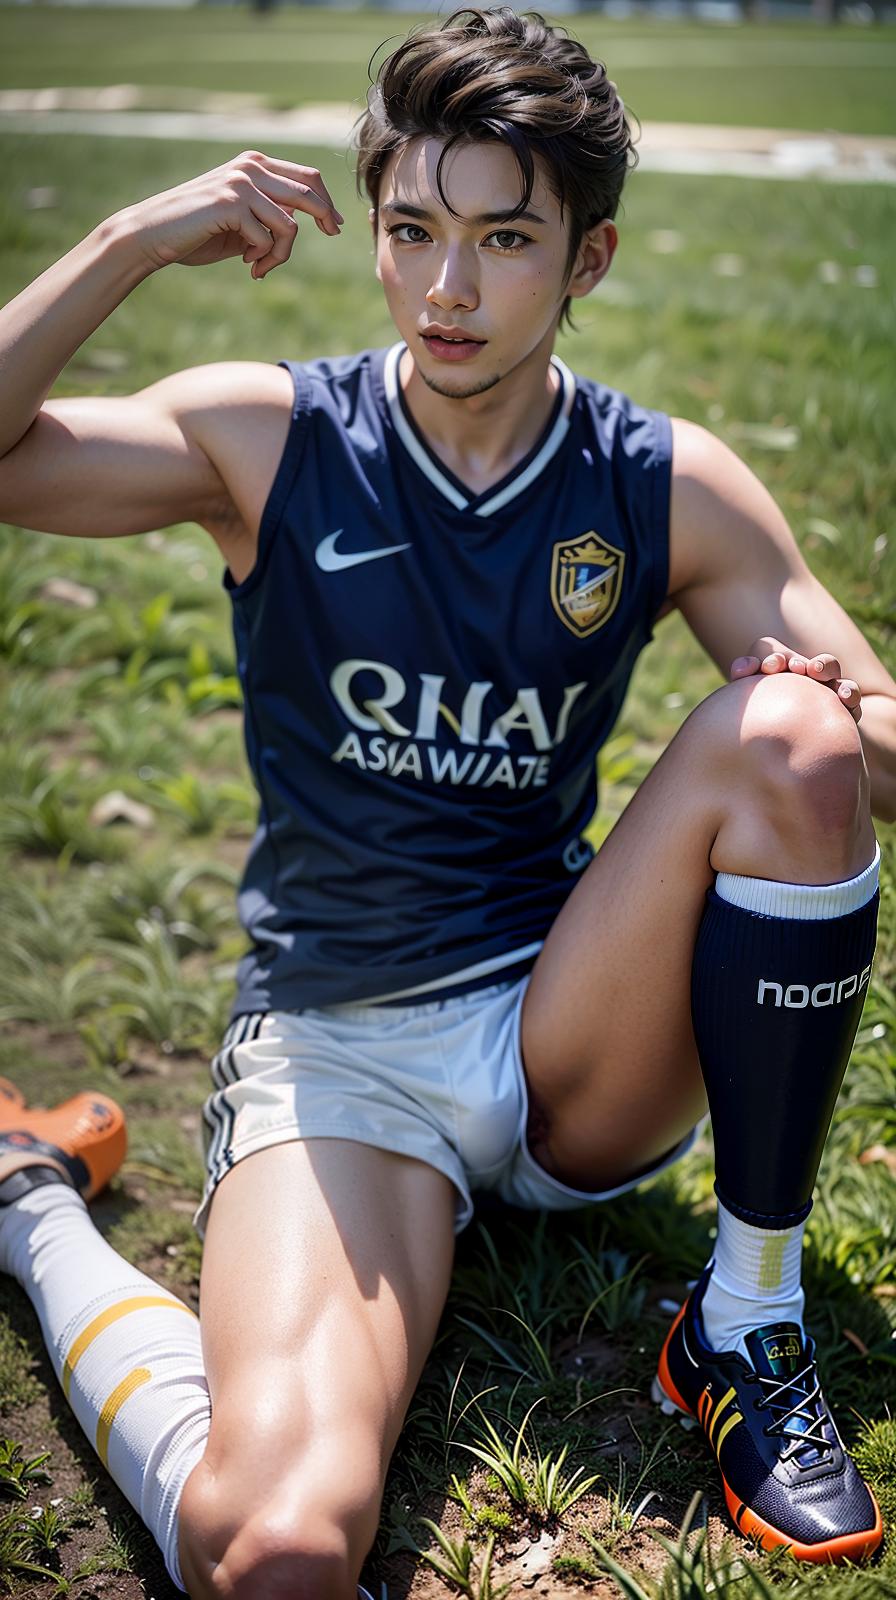  ultra high res, (photorealistic:1.4), raw photo, (realistic face), realistic eyes, (realistic skin), <lora:XXMix9_v20LoRa:0.8>, handsome, (male:2), (asian:2), (soccer players:1.2), (short hair:1.2), (pompadour:1.4), (white briefs:1.3), (sleeveless:1.2), spike shoes, (soccer shin guards:1.3), young, sitting posture, (spread legs:1.1), real skin, (sexy posing:1.3), hot guy, (muscular:1.3), (naked:1.1), (bulge:1.1), trained calves, thigh, realistic, lifelike, high quality, photos taken with a single-lens reflex camera, (looking at the camera:1.2)